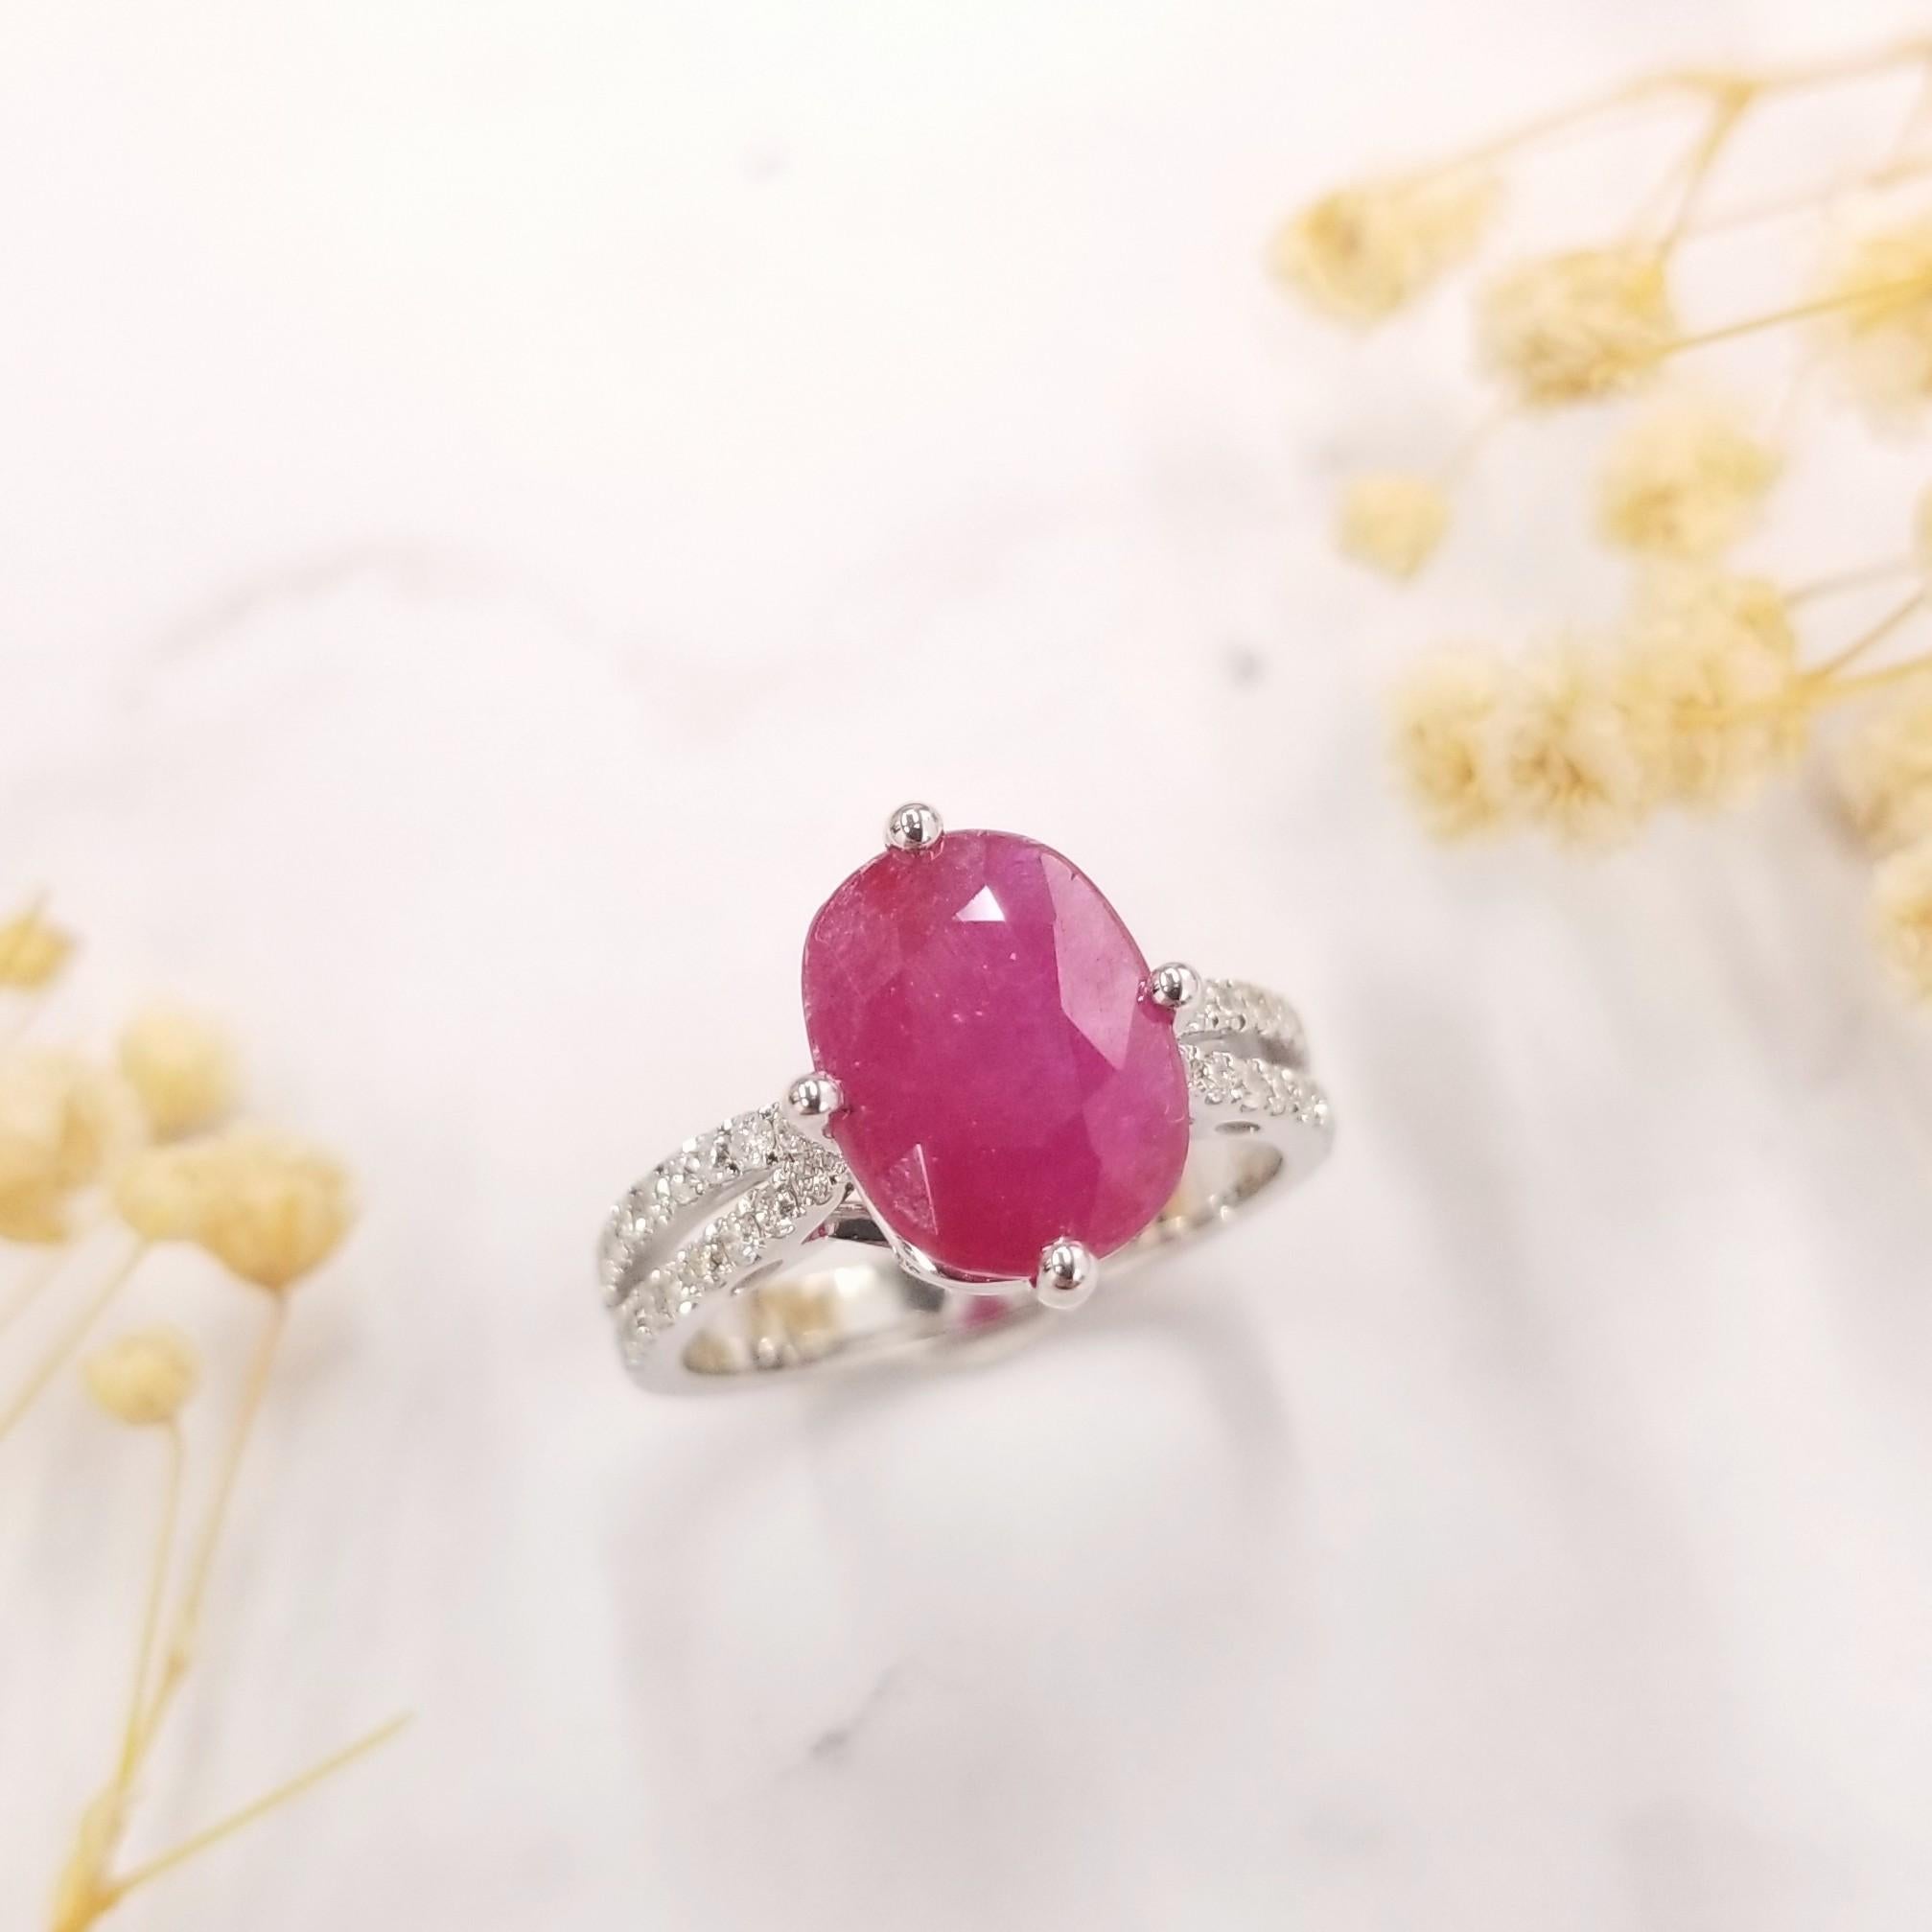 Unheated rubies are sought after for their rarity in market. This 18k white gold ring featuring a 3.15 carat rare oval-shaped ruby is a great example of the completely untreated natural allure - intense red tones with the slightest hint of purple.